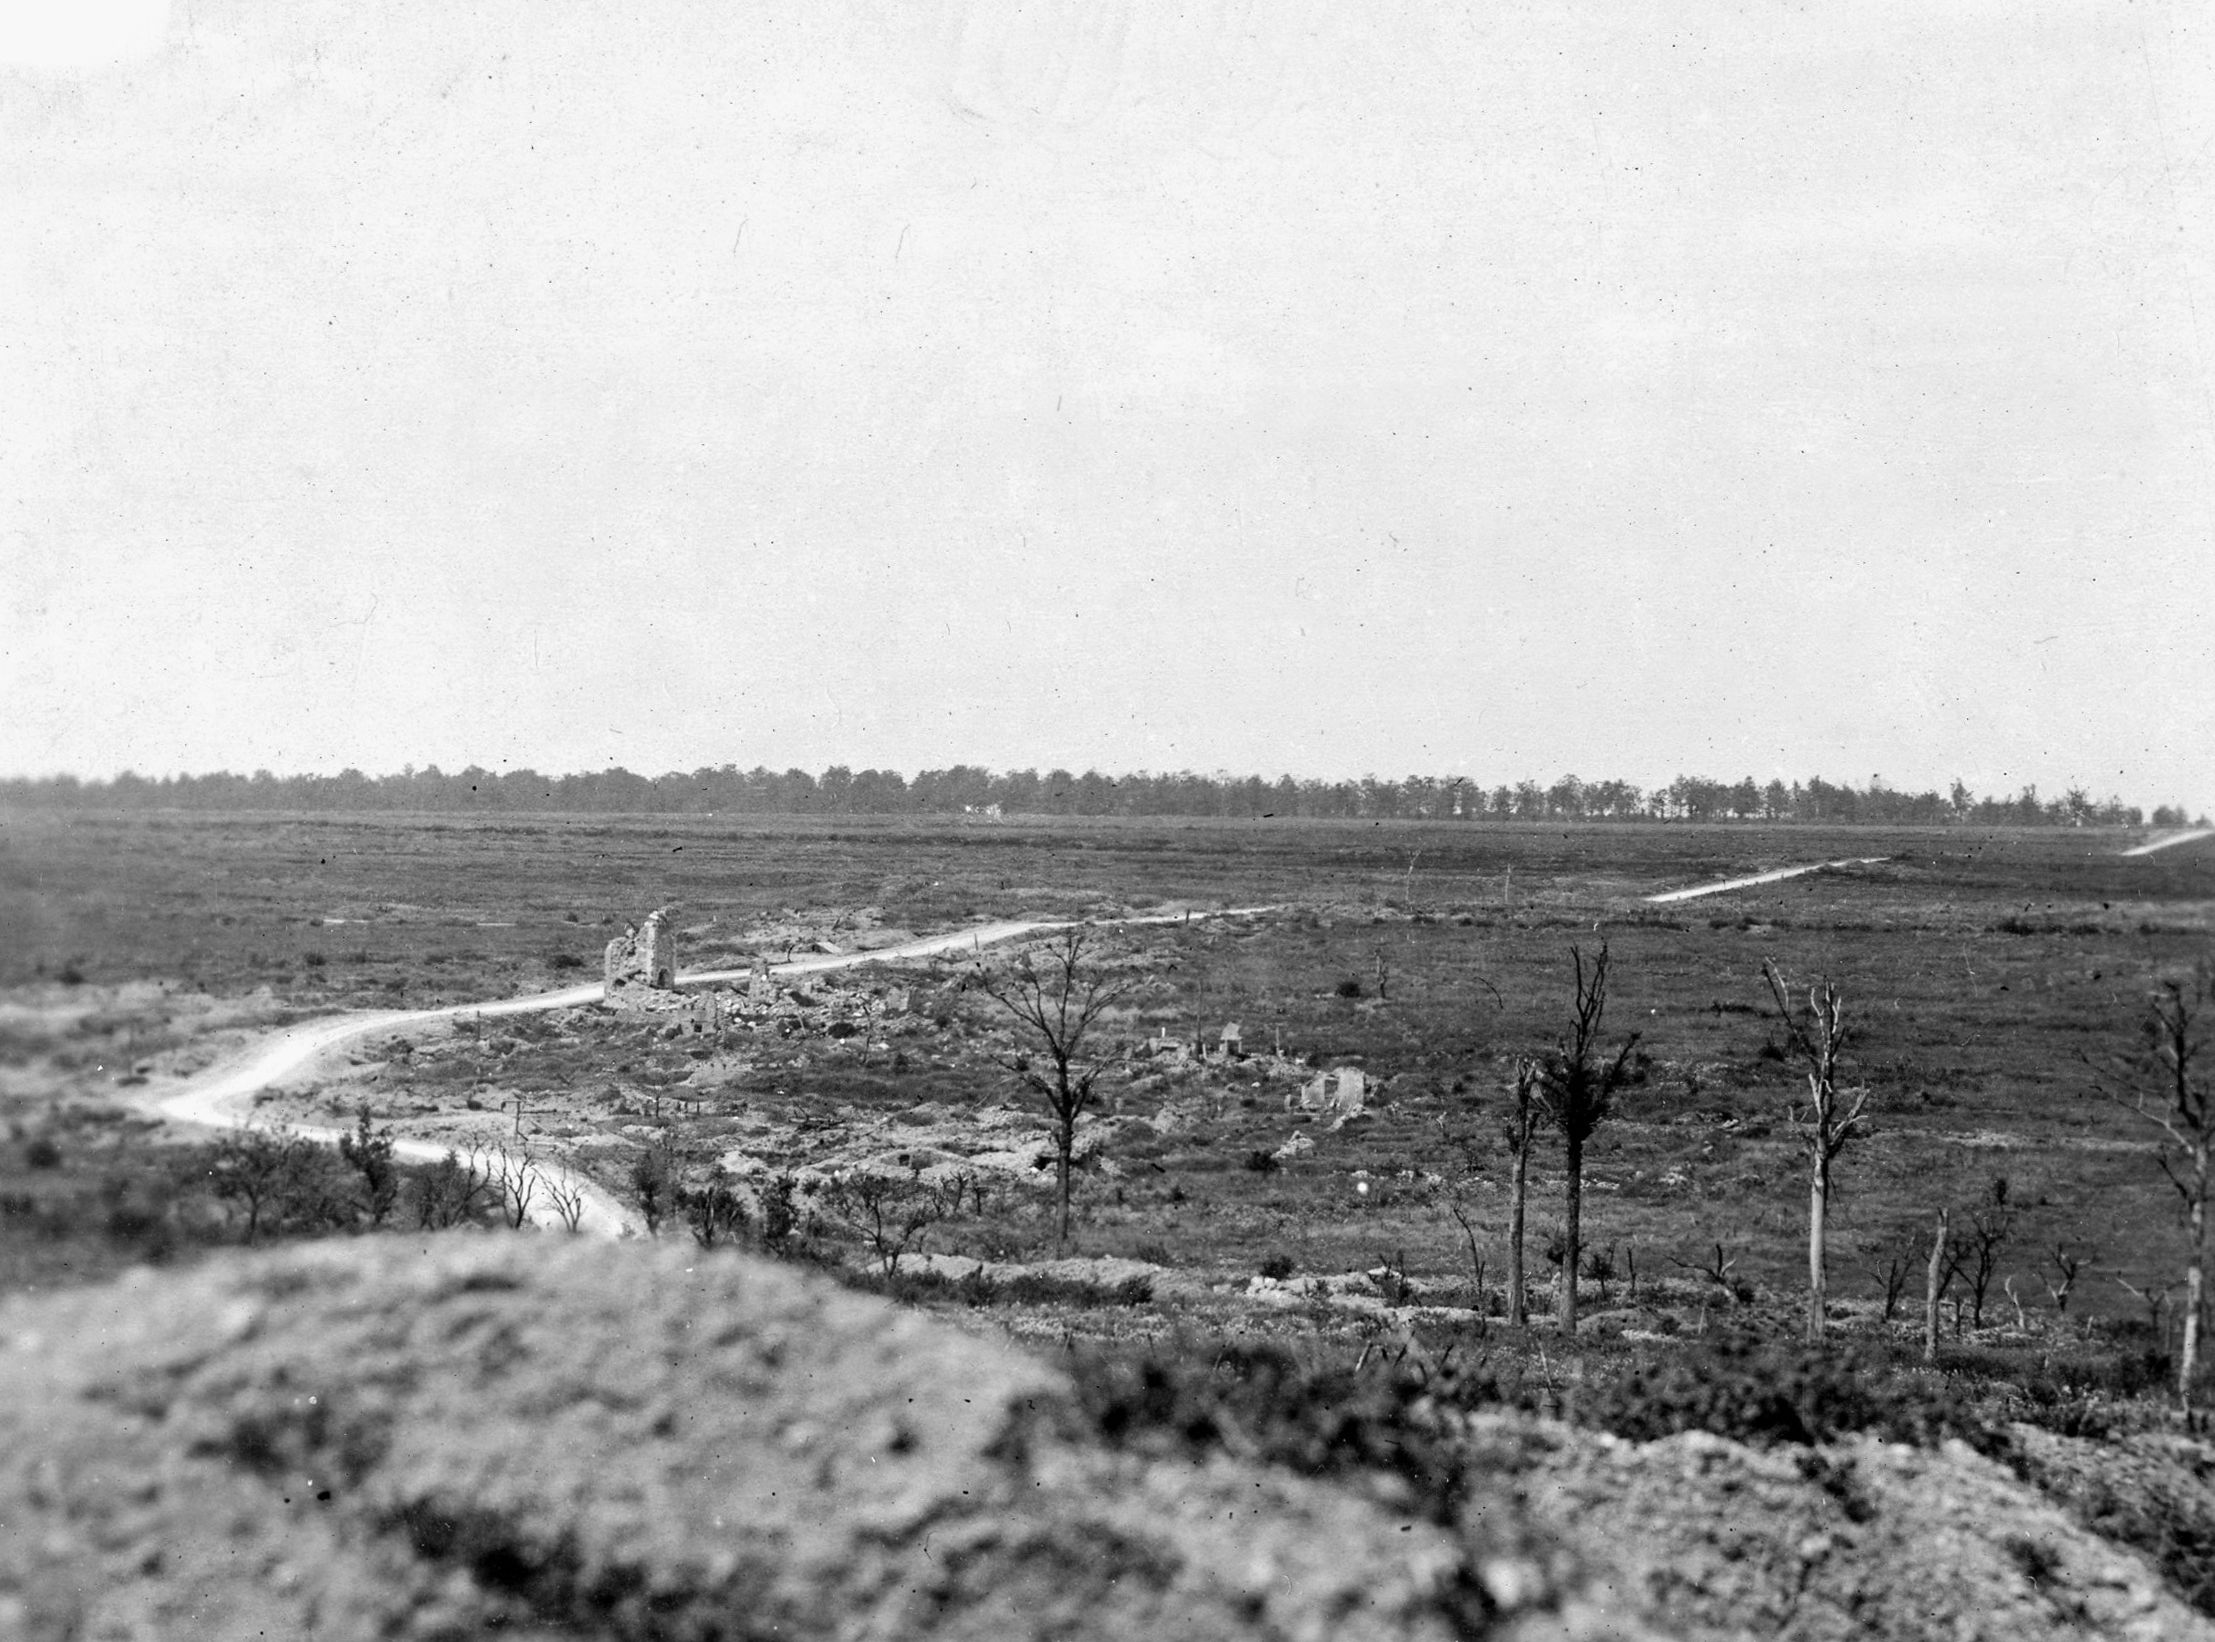 Looking northwest across no-man’s-land toward the ruins of Regnieville and the road to Thiacourt. The American 5th Division’s jumping-off point was around the northern edge of the ruins.